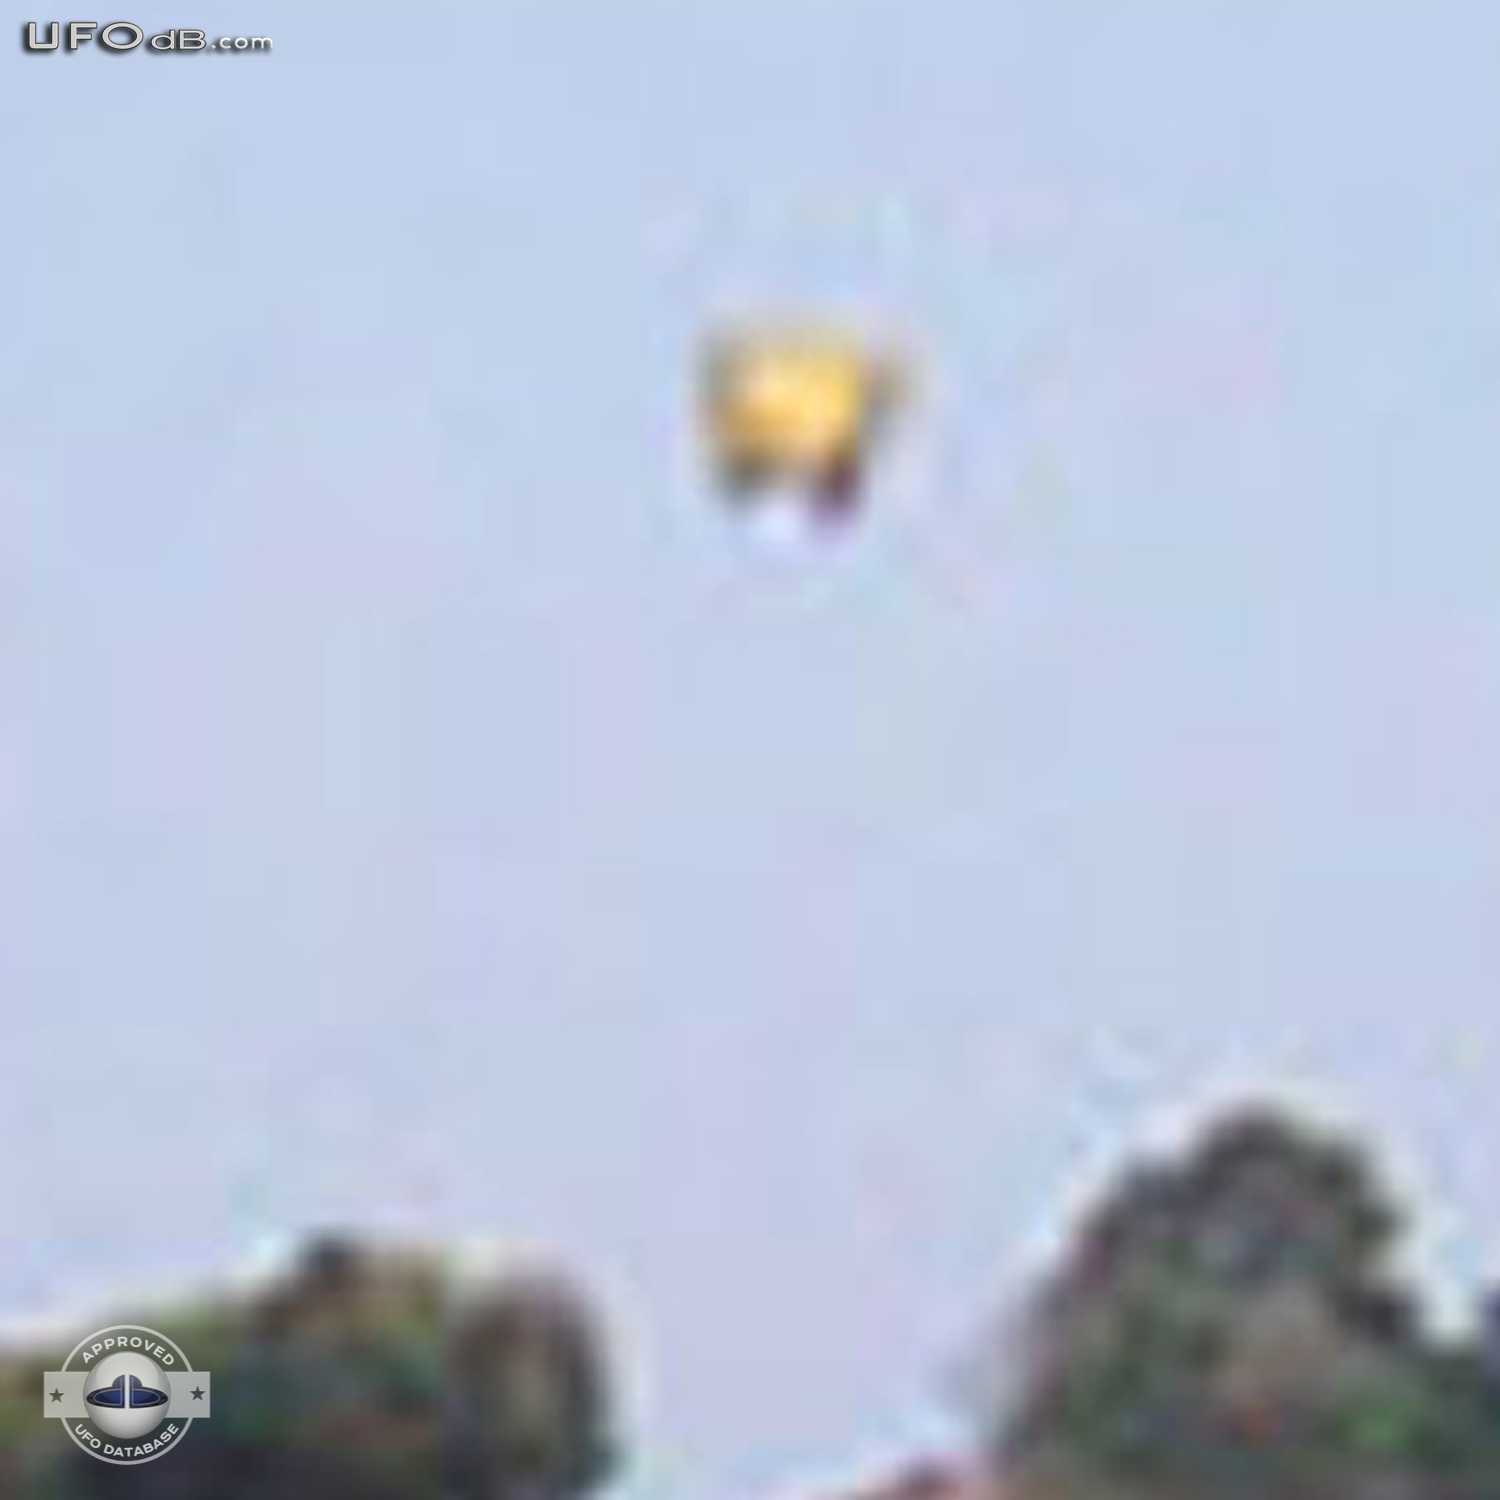 Family in Argentina blames a UFO for their sickness | February 28 2011 UFO Picture #271-5